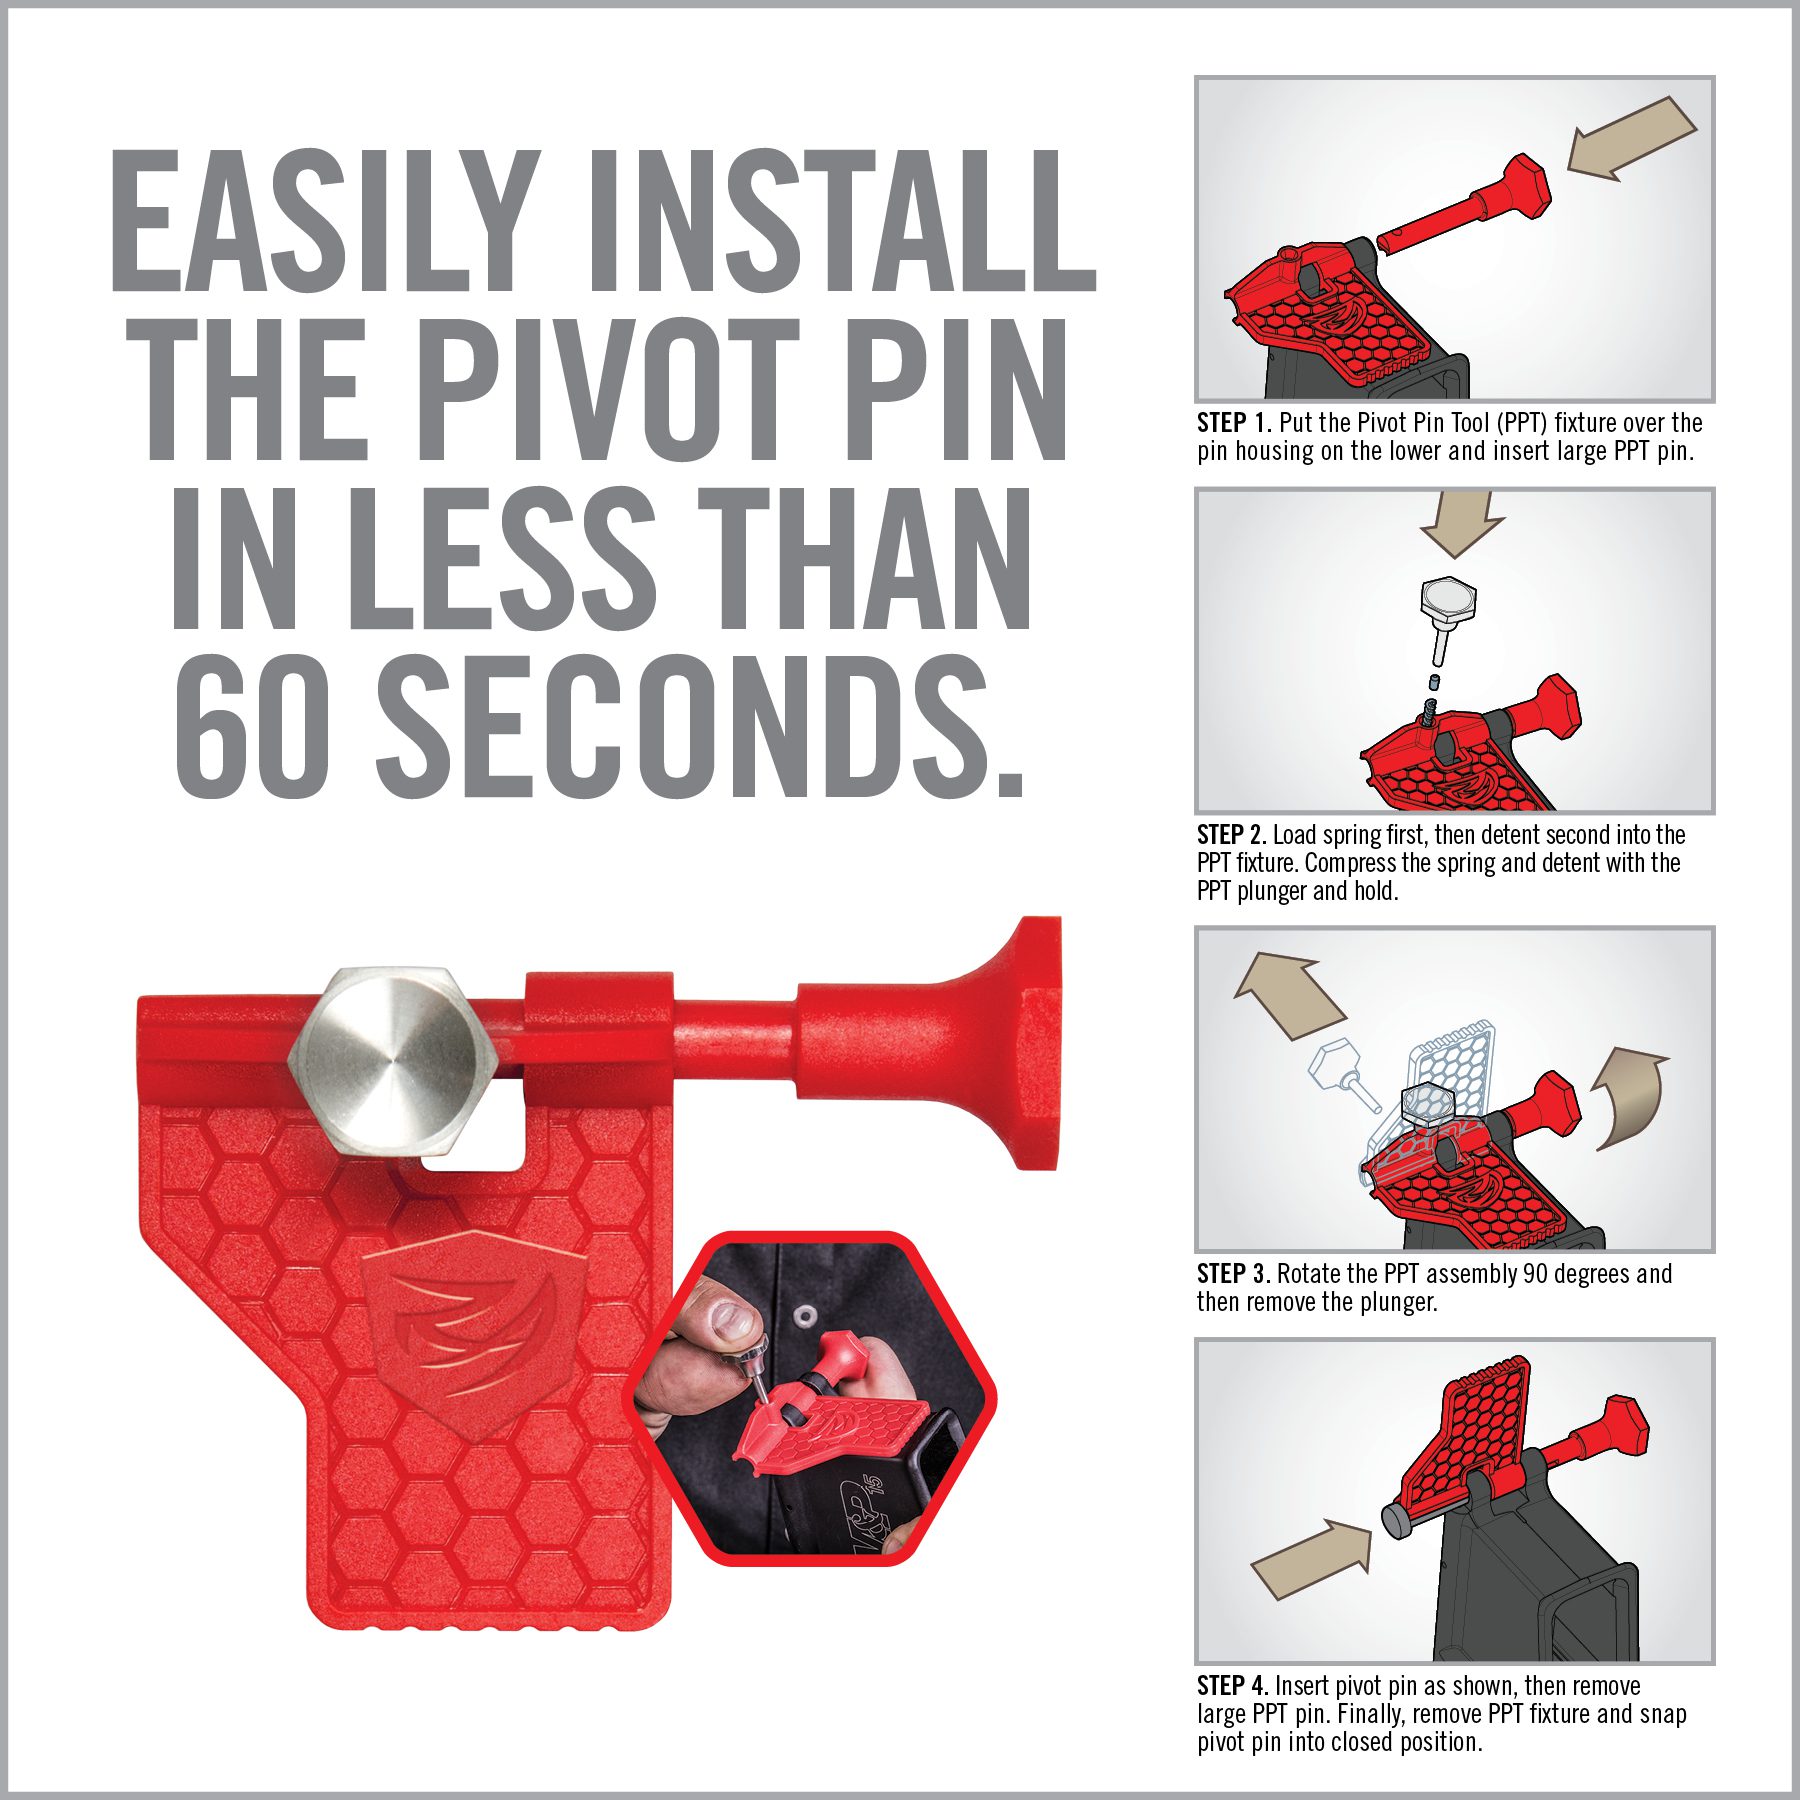 instructions for how to install the pivot pin in less than 60 seconds